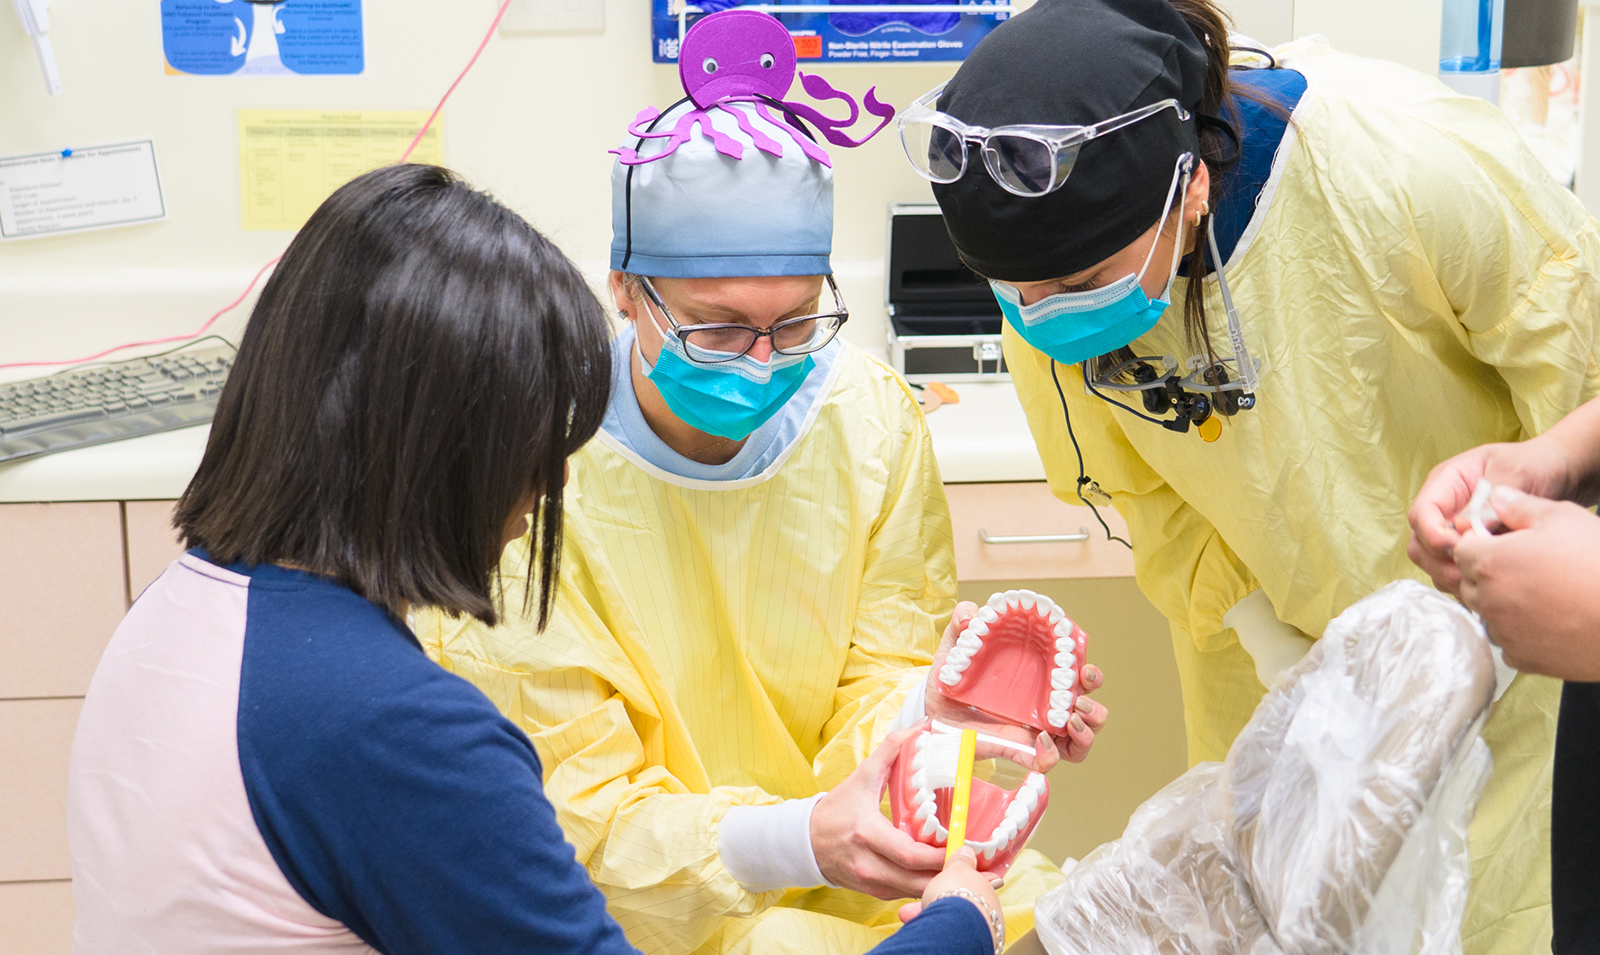 Dentist showing patient a model of a human mouth.